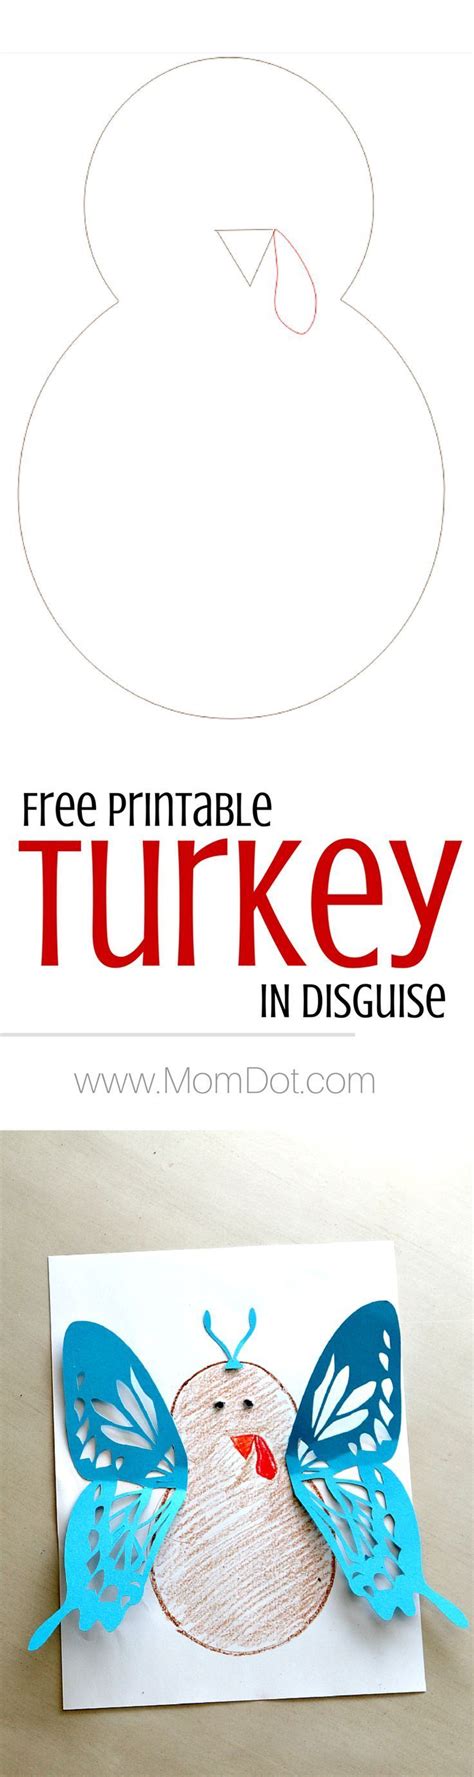 turkey disguise project  printable